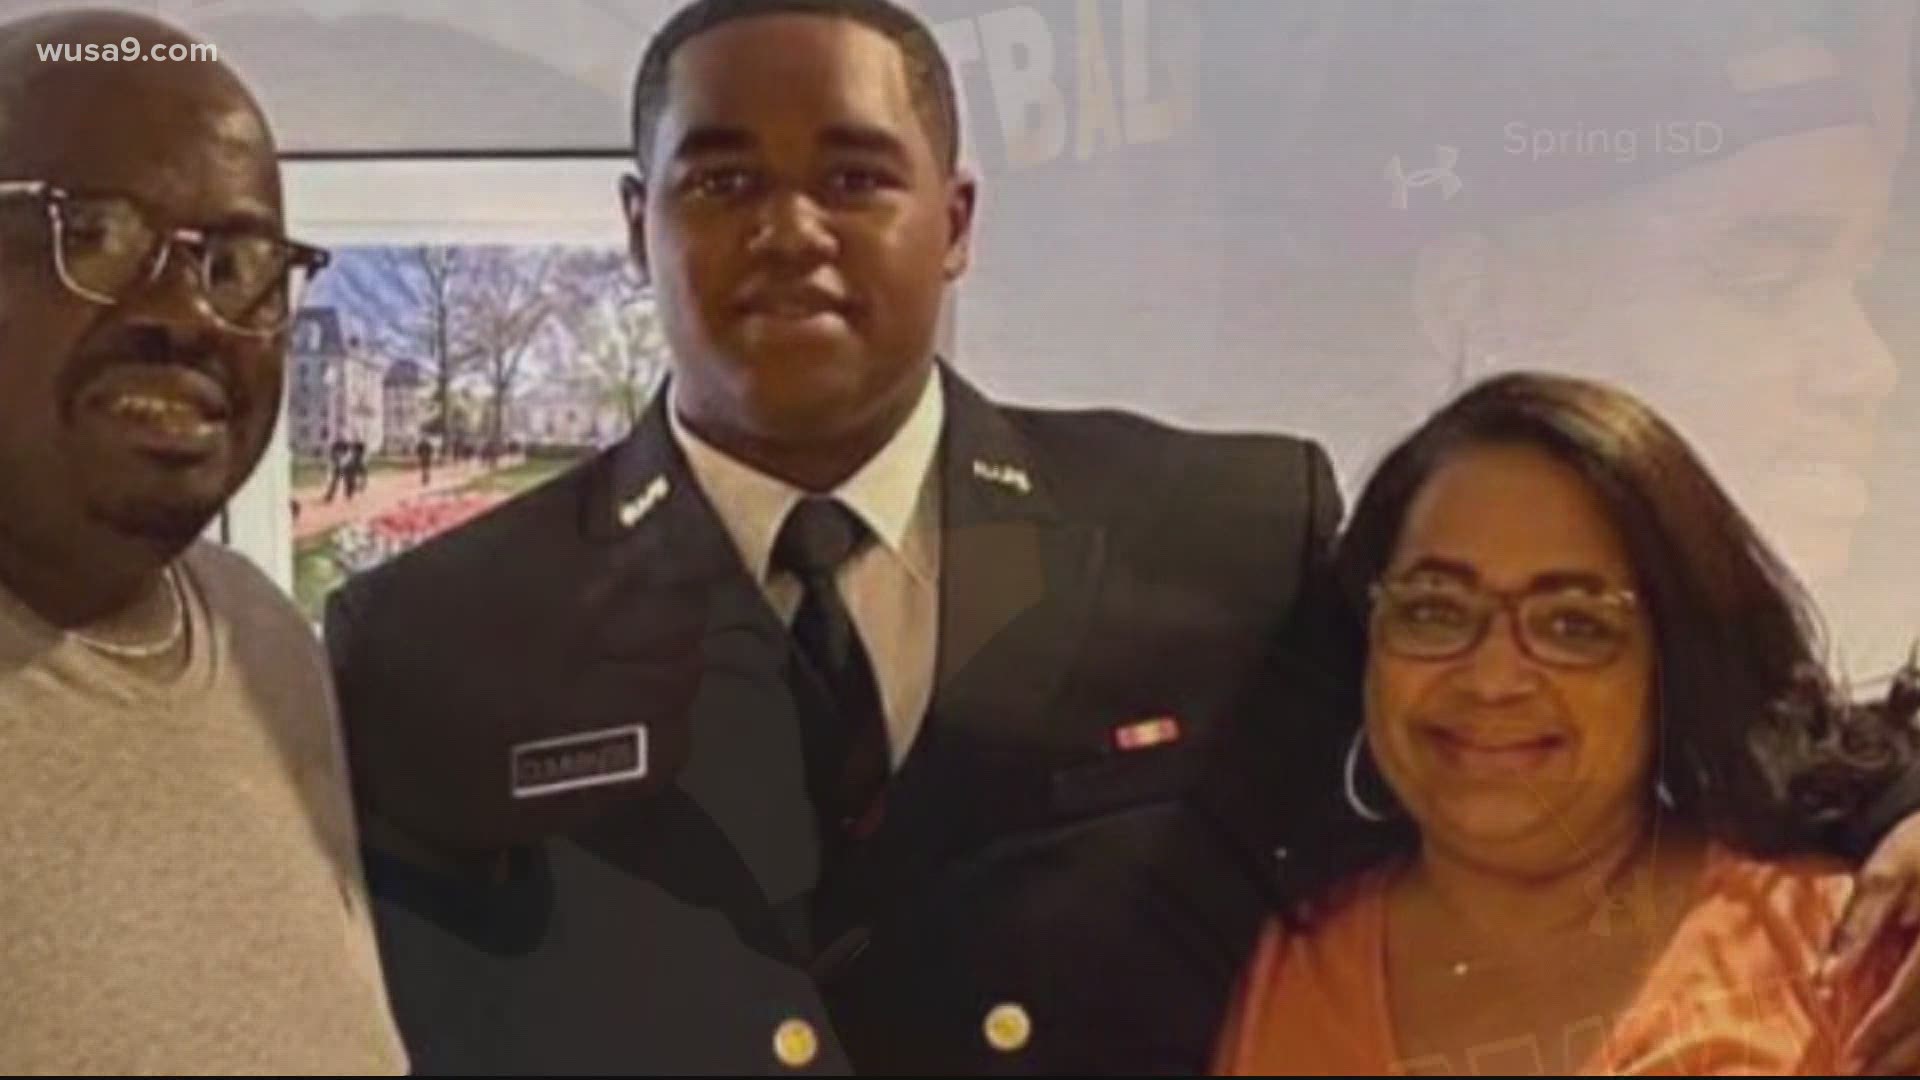 Rewards are being offered for anyone with information about the death of the mom of a prospective Naval Academy football player